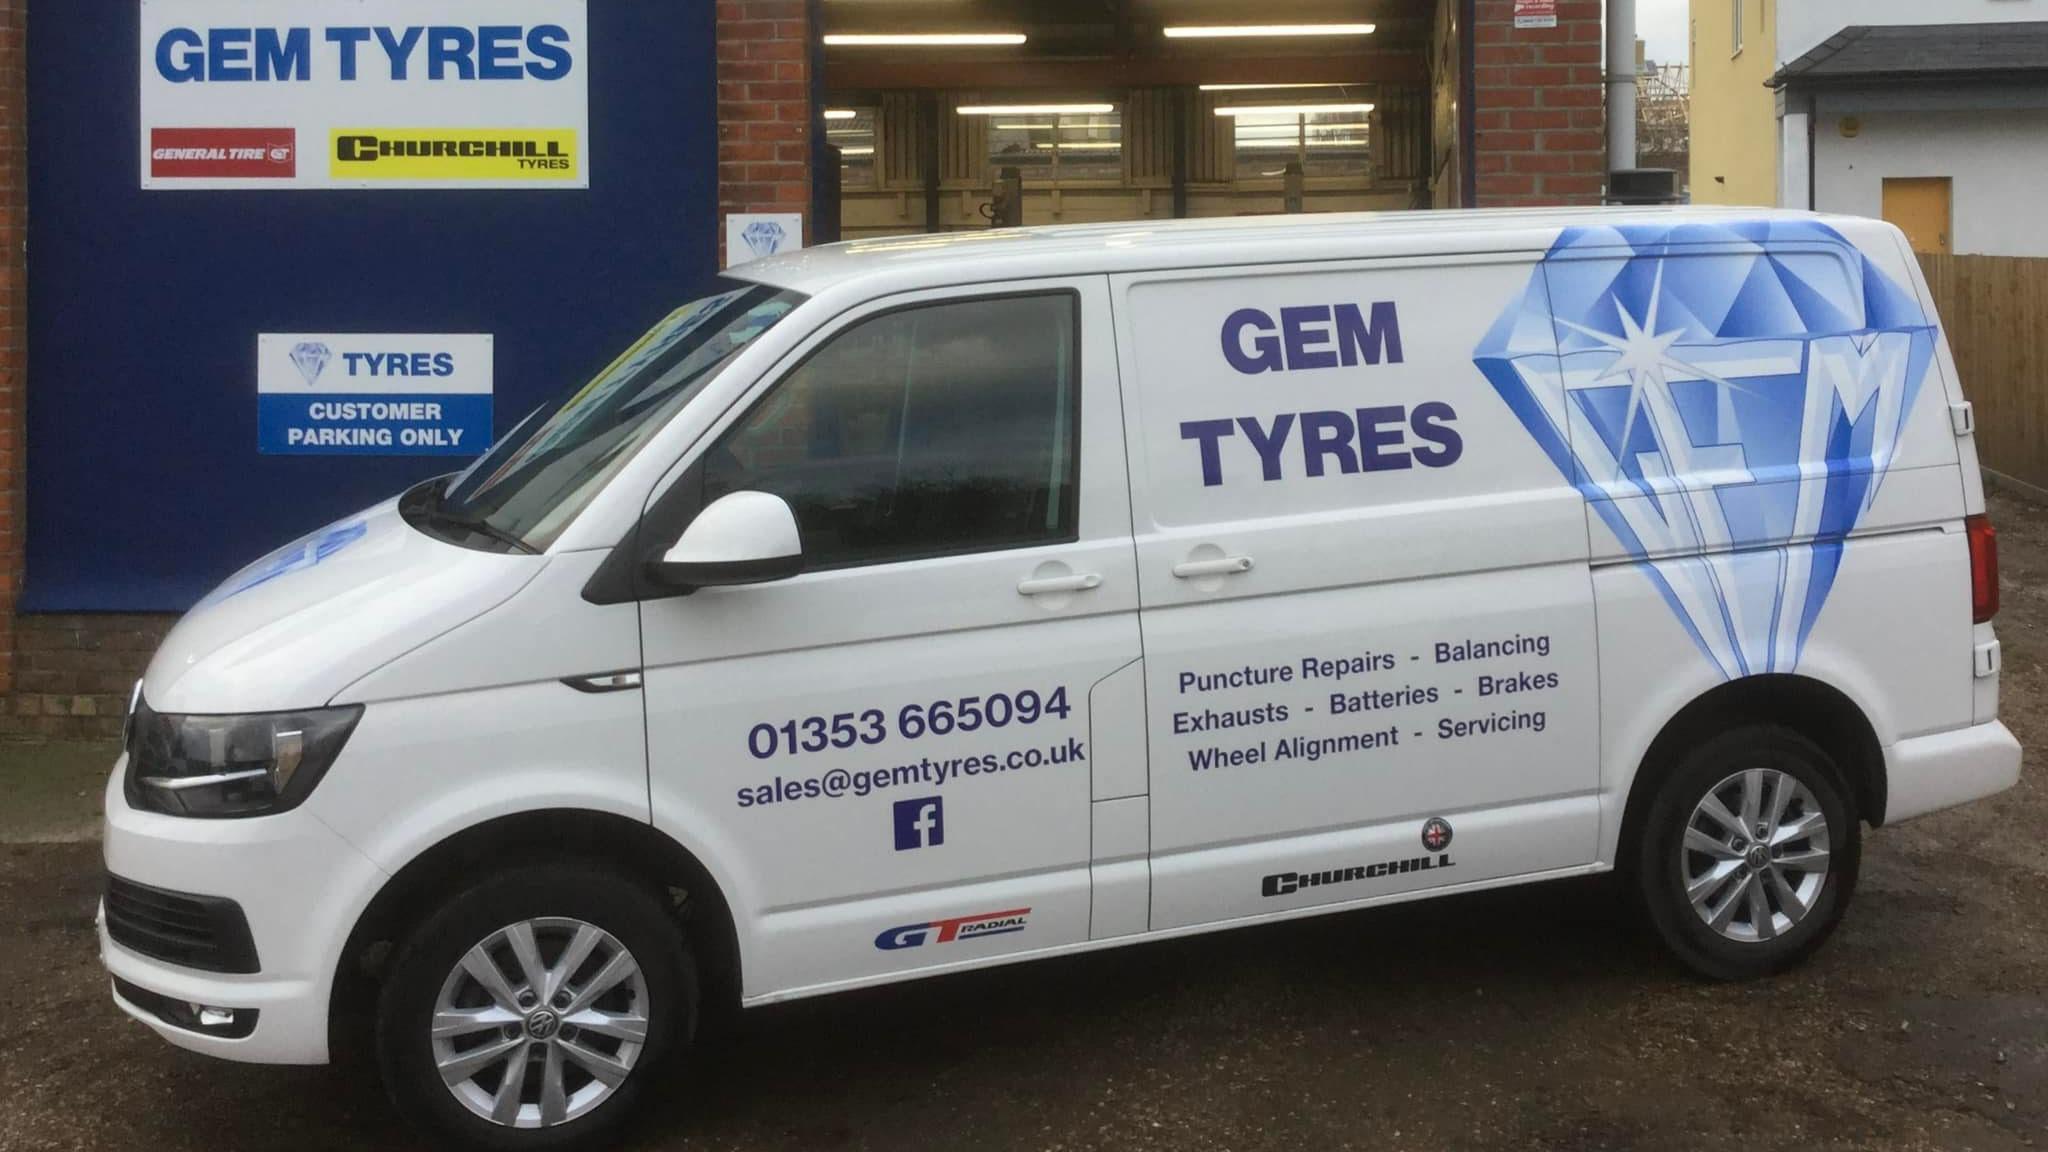 Images Gem Tyres, Exhausts and Batteries